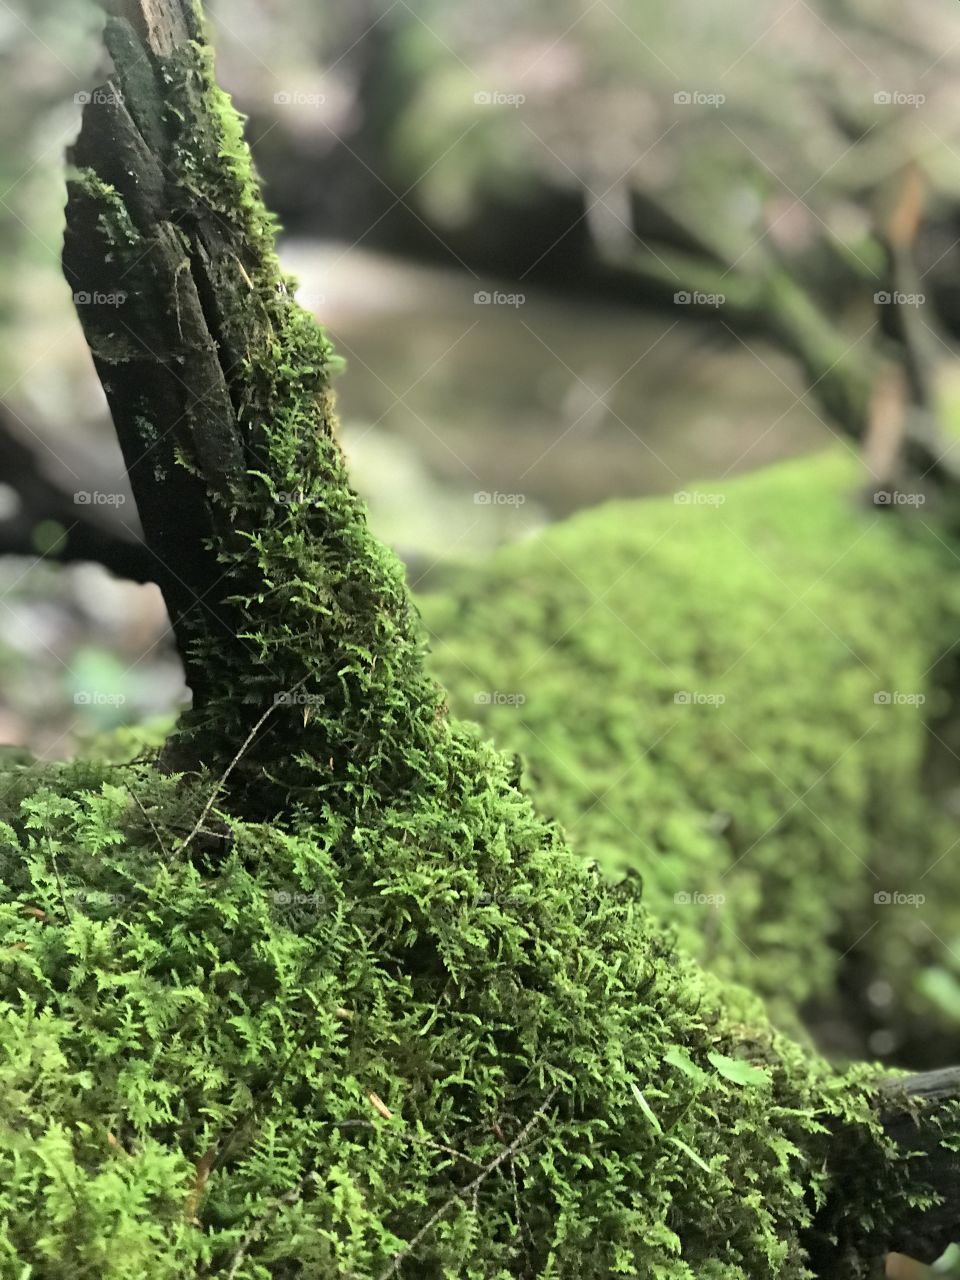 The detail of this moss is mesmerizing. How many luscious, gorgeous green patterns it contains!